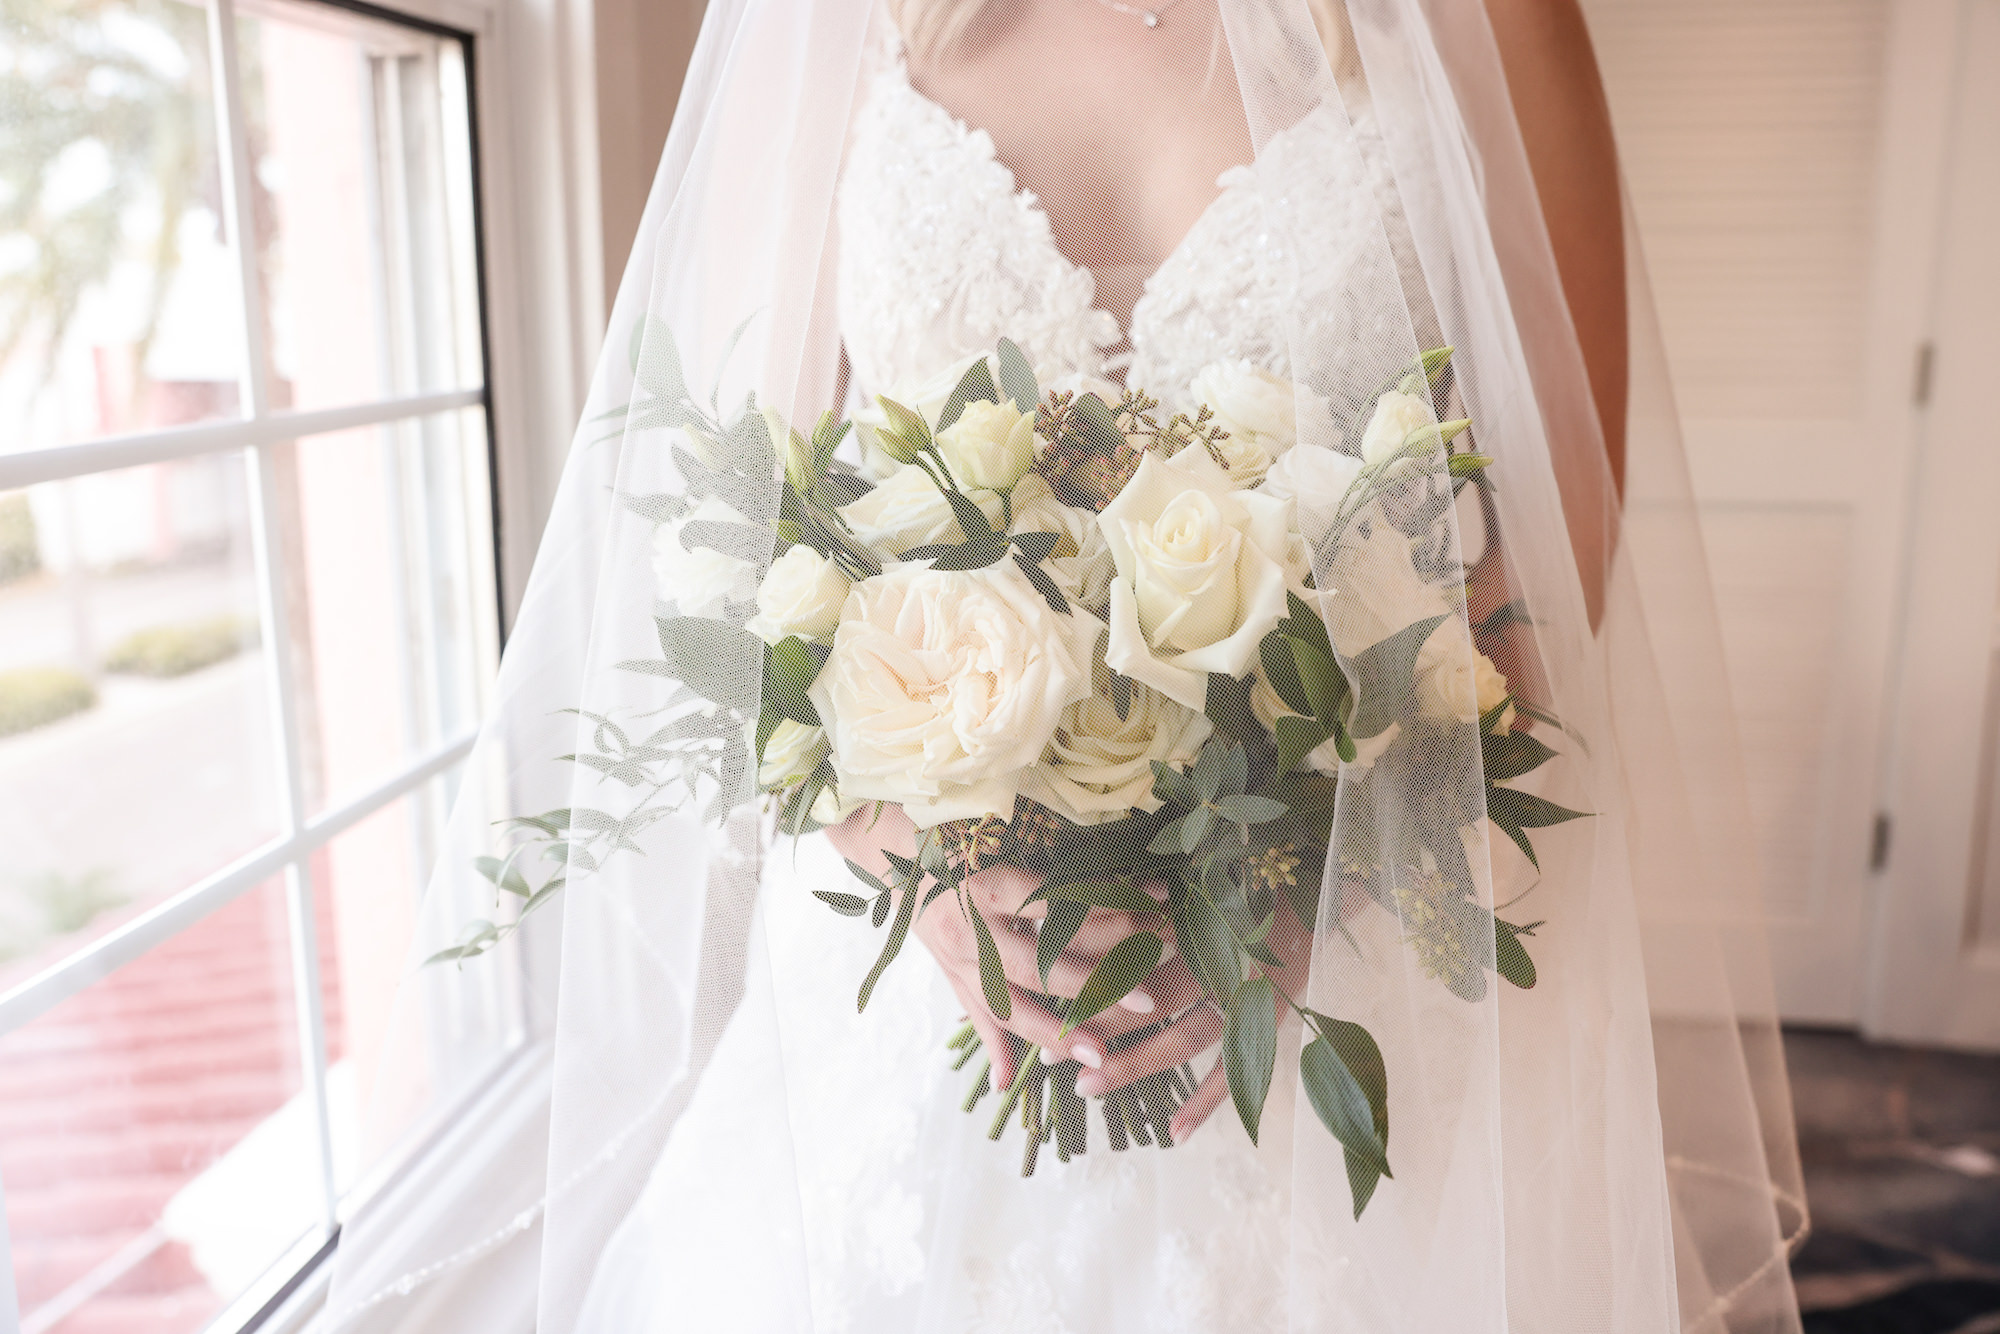 Bridal White Rose and Snapdragon with Greenery Wedding Bouquet Inspiration | St Petersburg Florist Bruce Wayne Florals